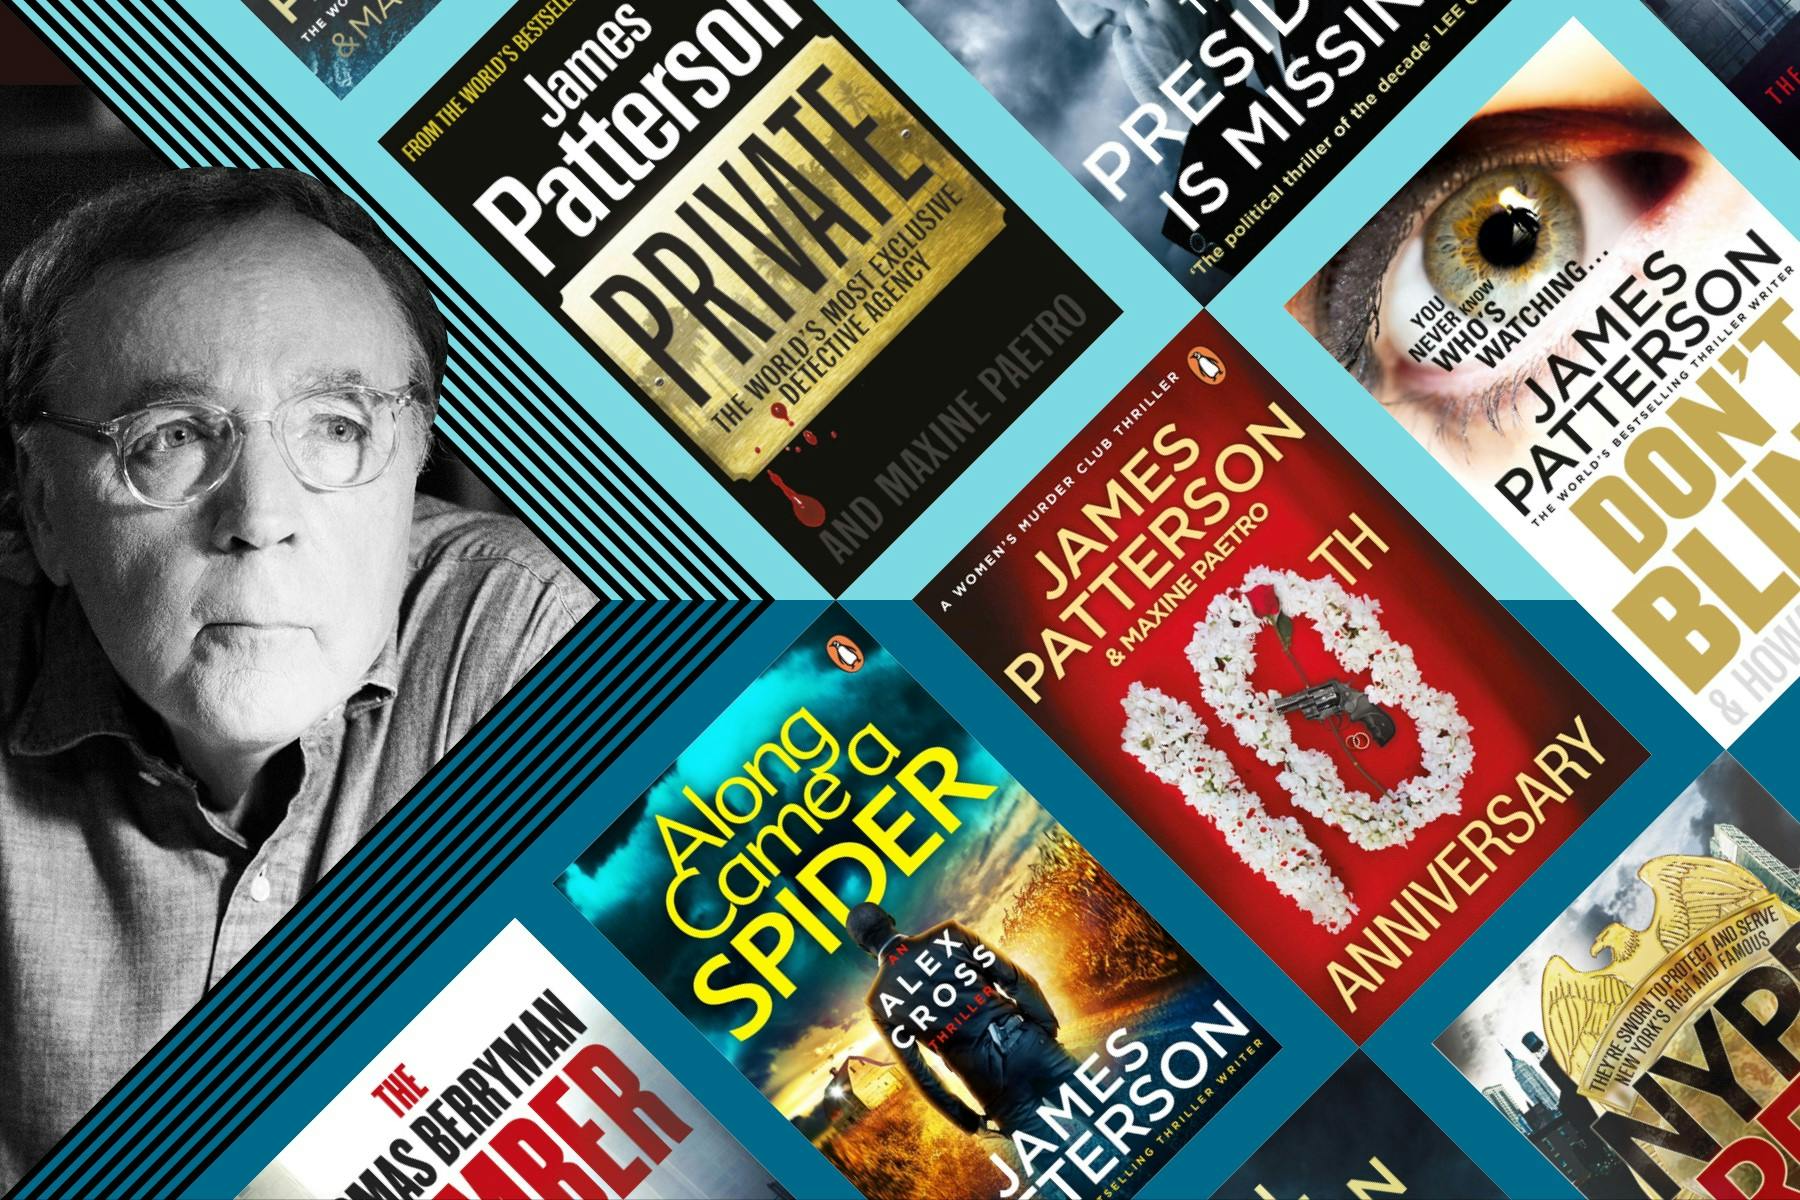 Where to start reading James Patterson